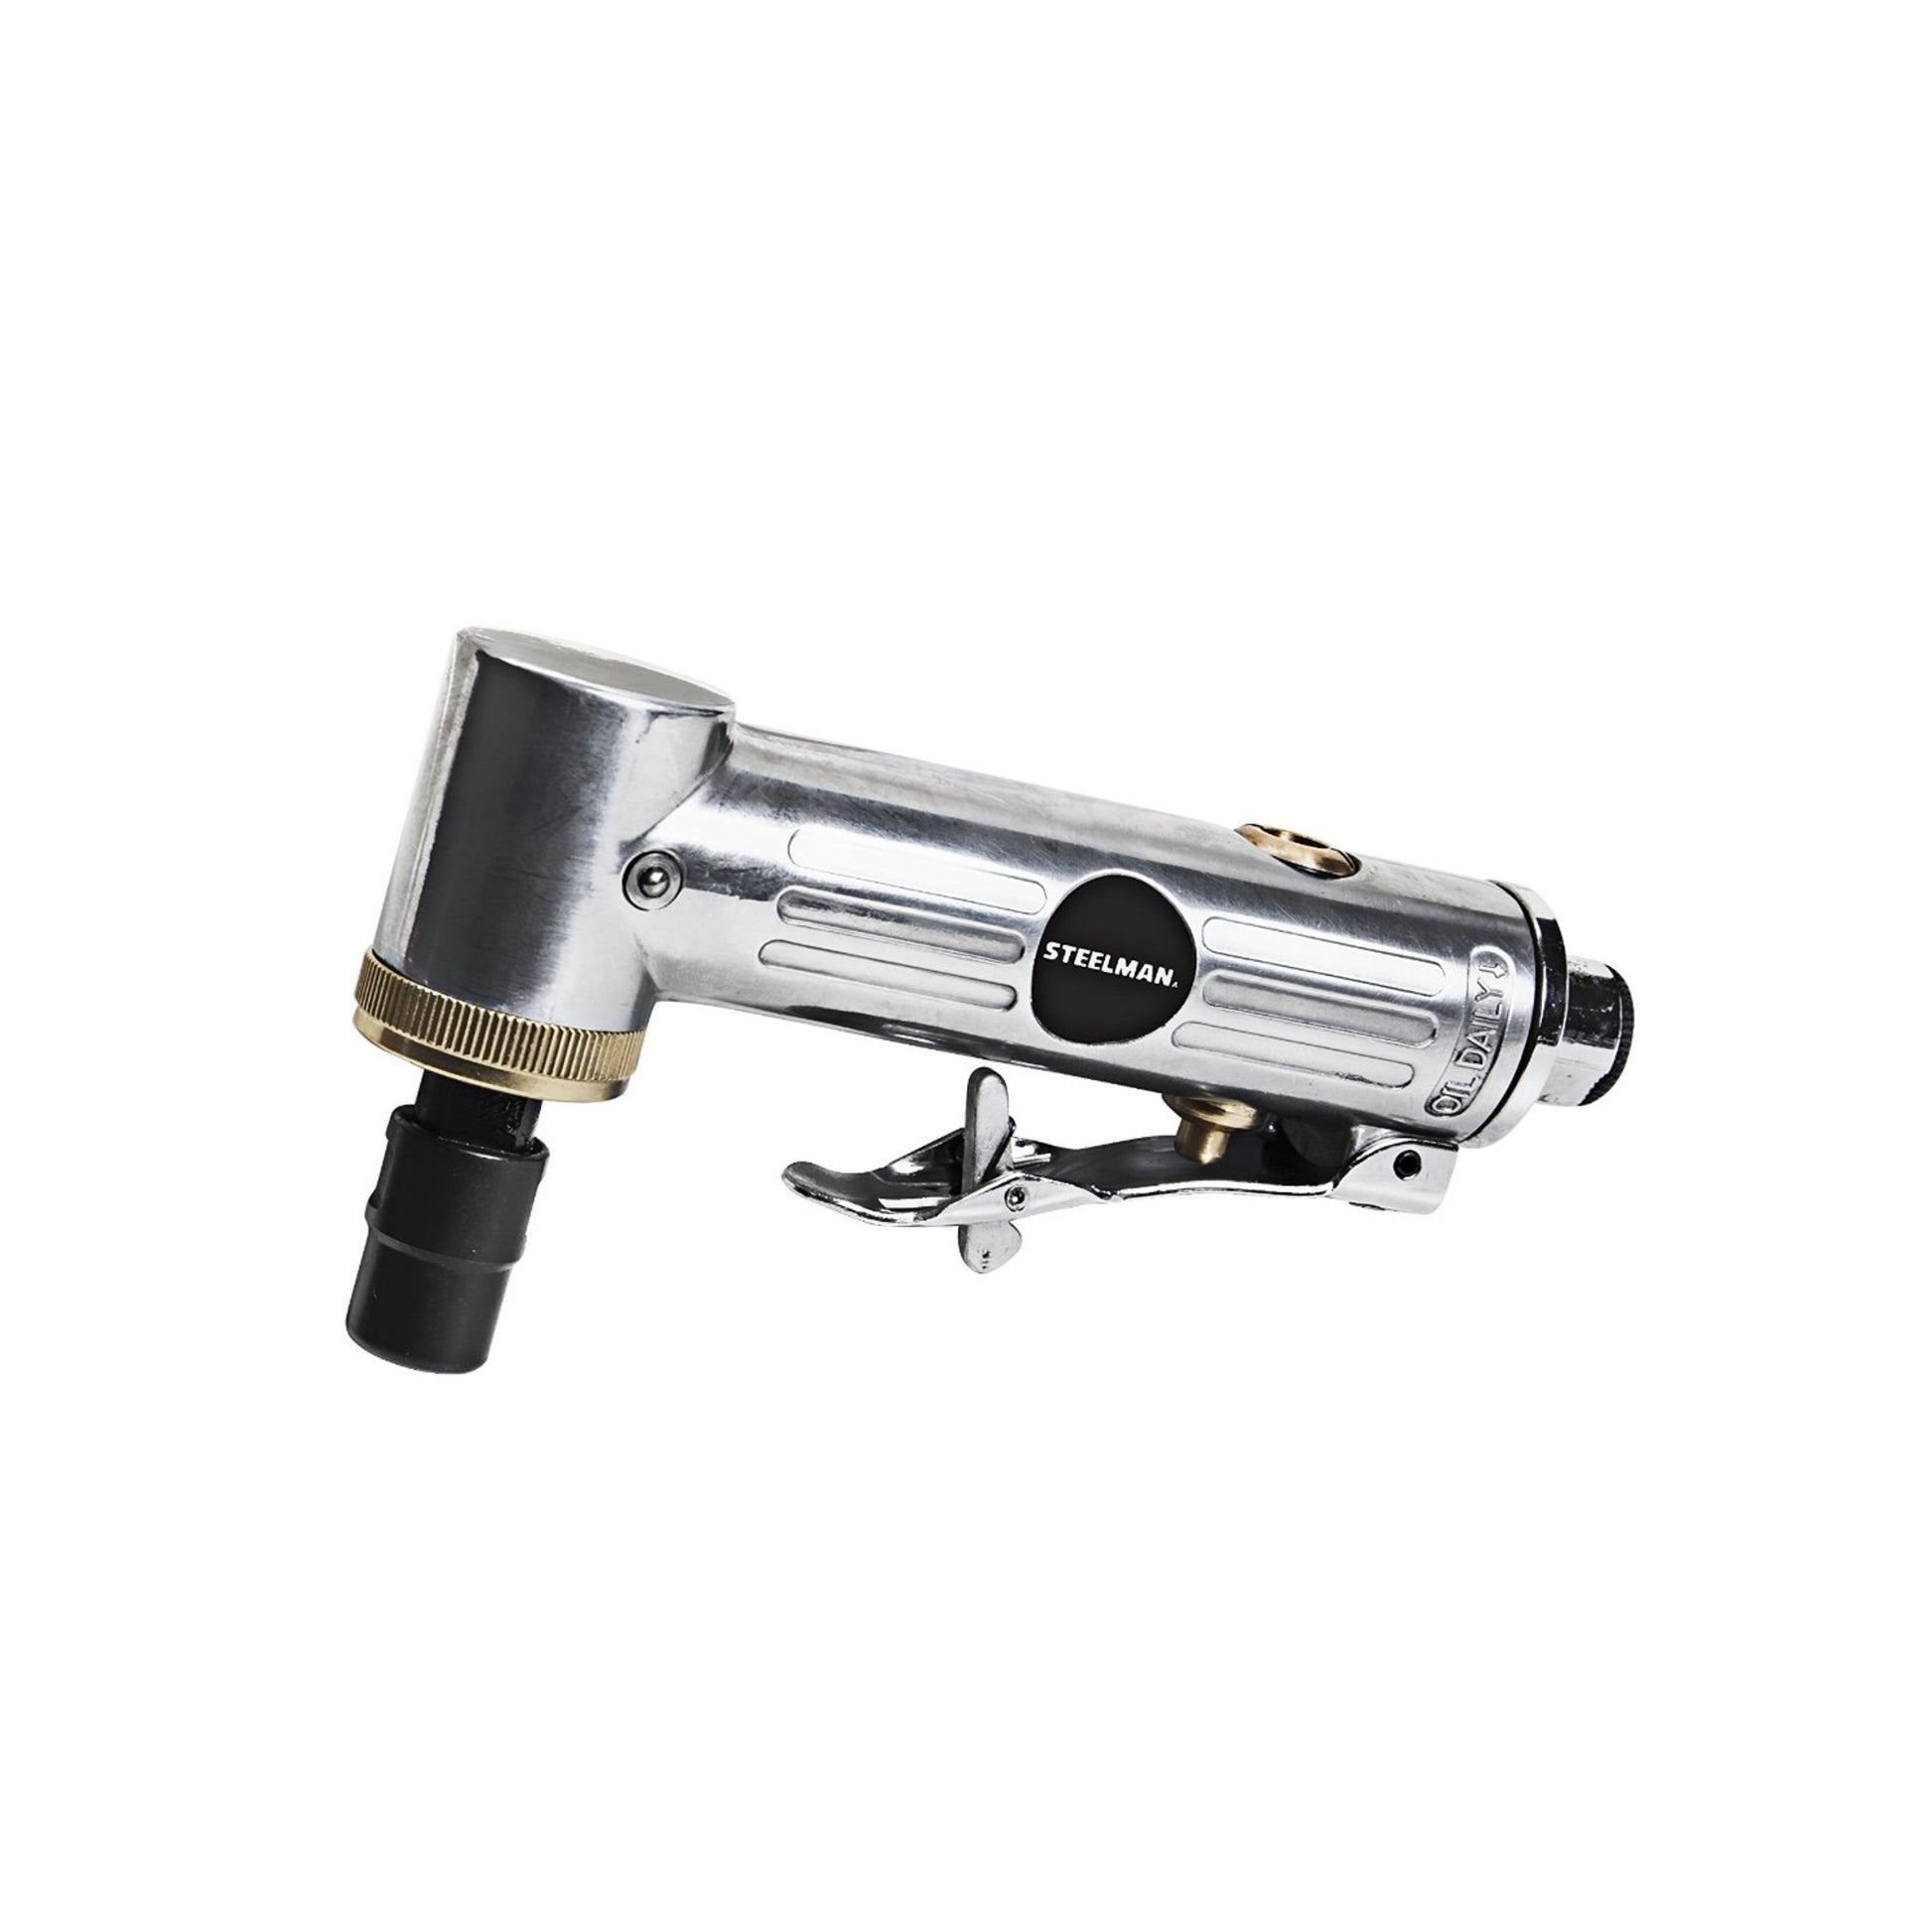 1/4 Mini Pneumatic Right-Angle Head Die Grinder (12,000 RPM